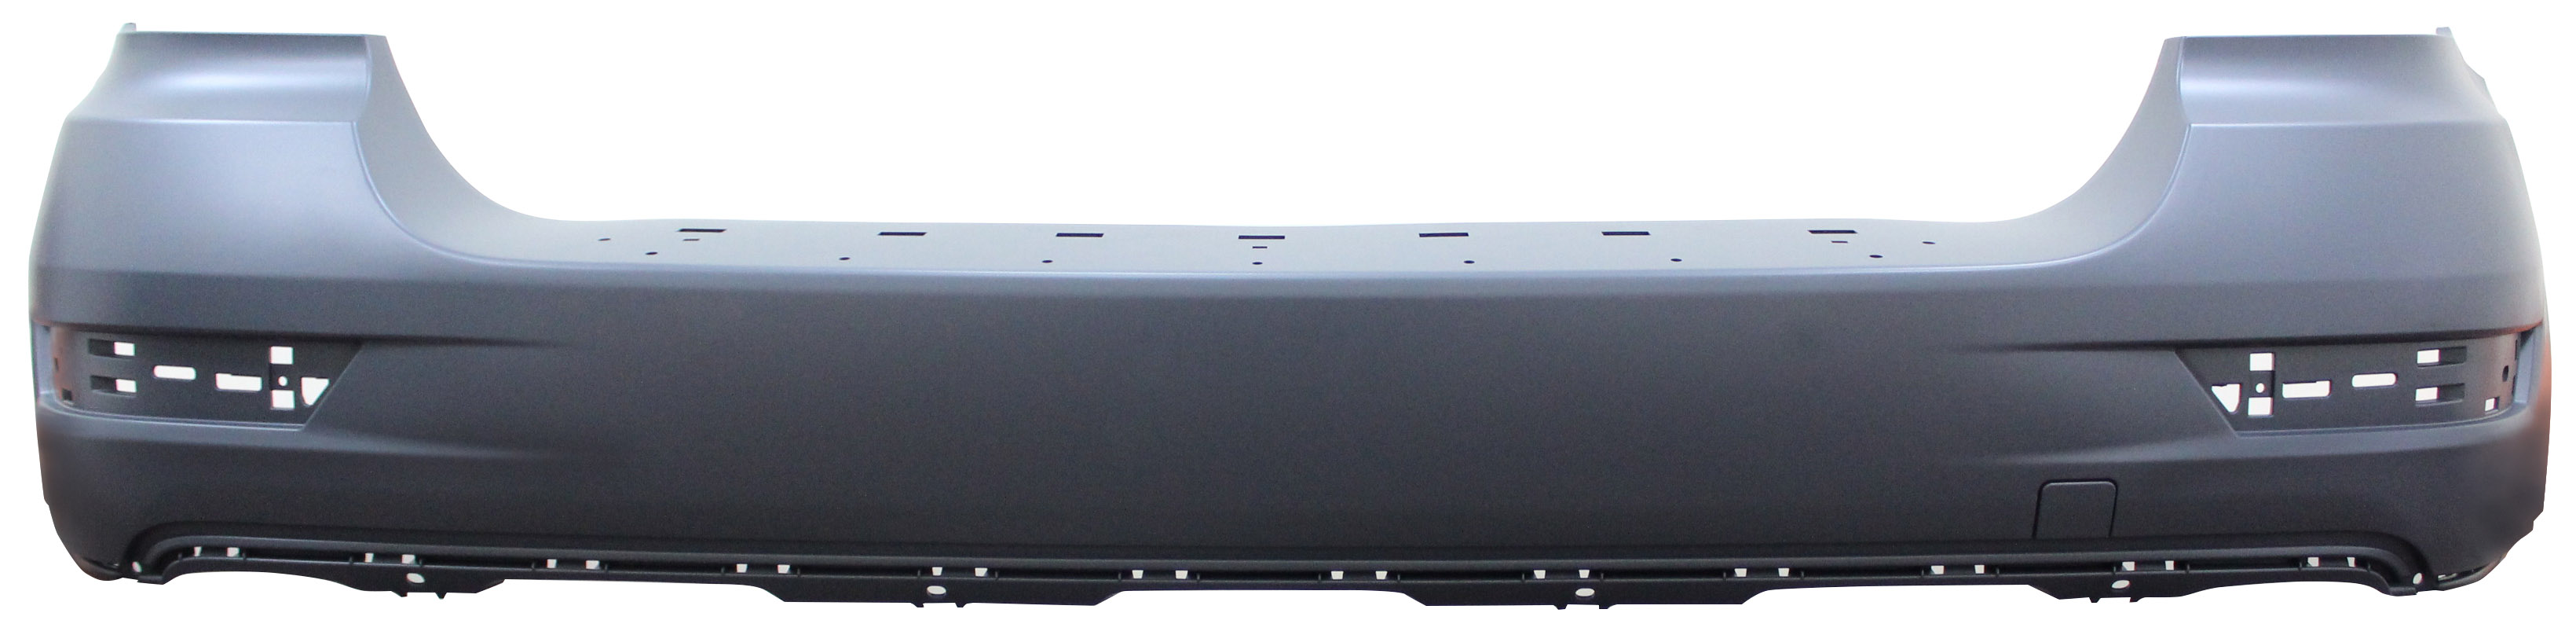 Aftermarket BUMPER COVERS for MERCEDES-BENZ - ML500, ML500,06-07,Rear bumper cover